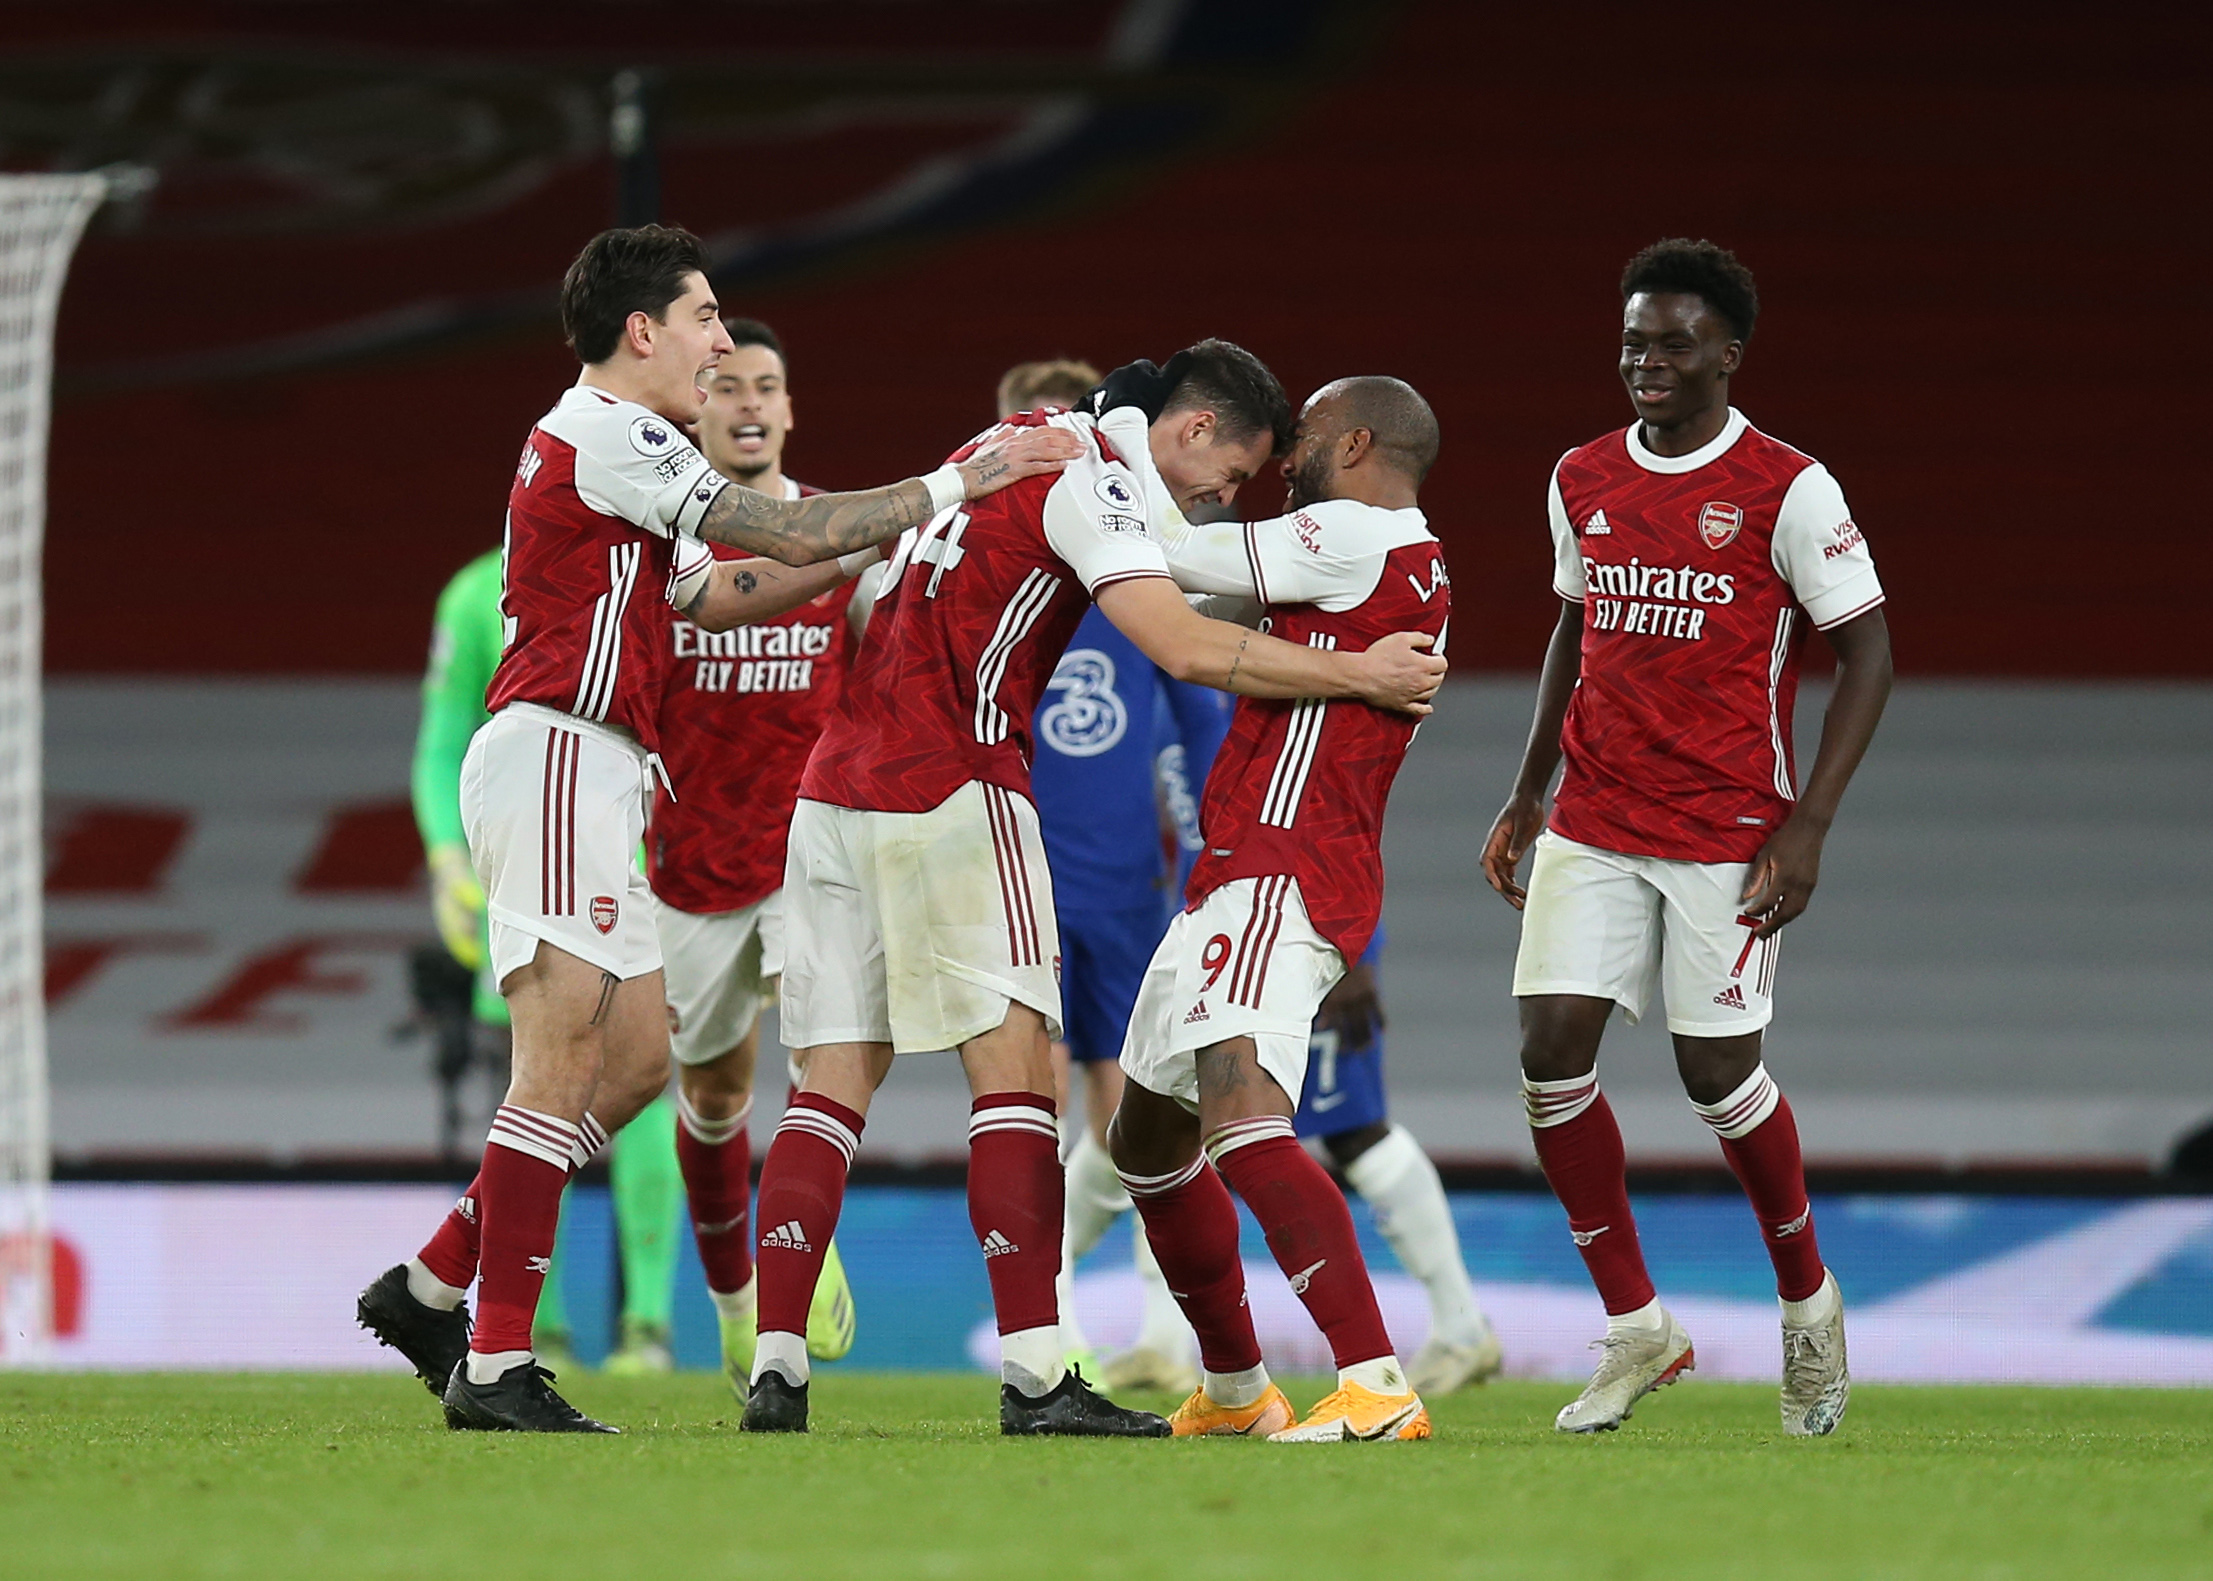 Three reasons to be cheerful as Mikel Arteta’s young guns shine for Arsenal